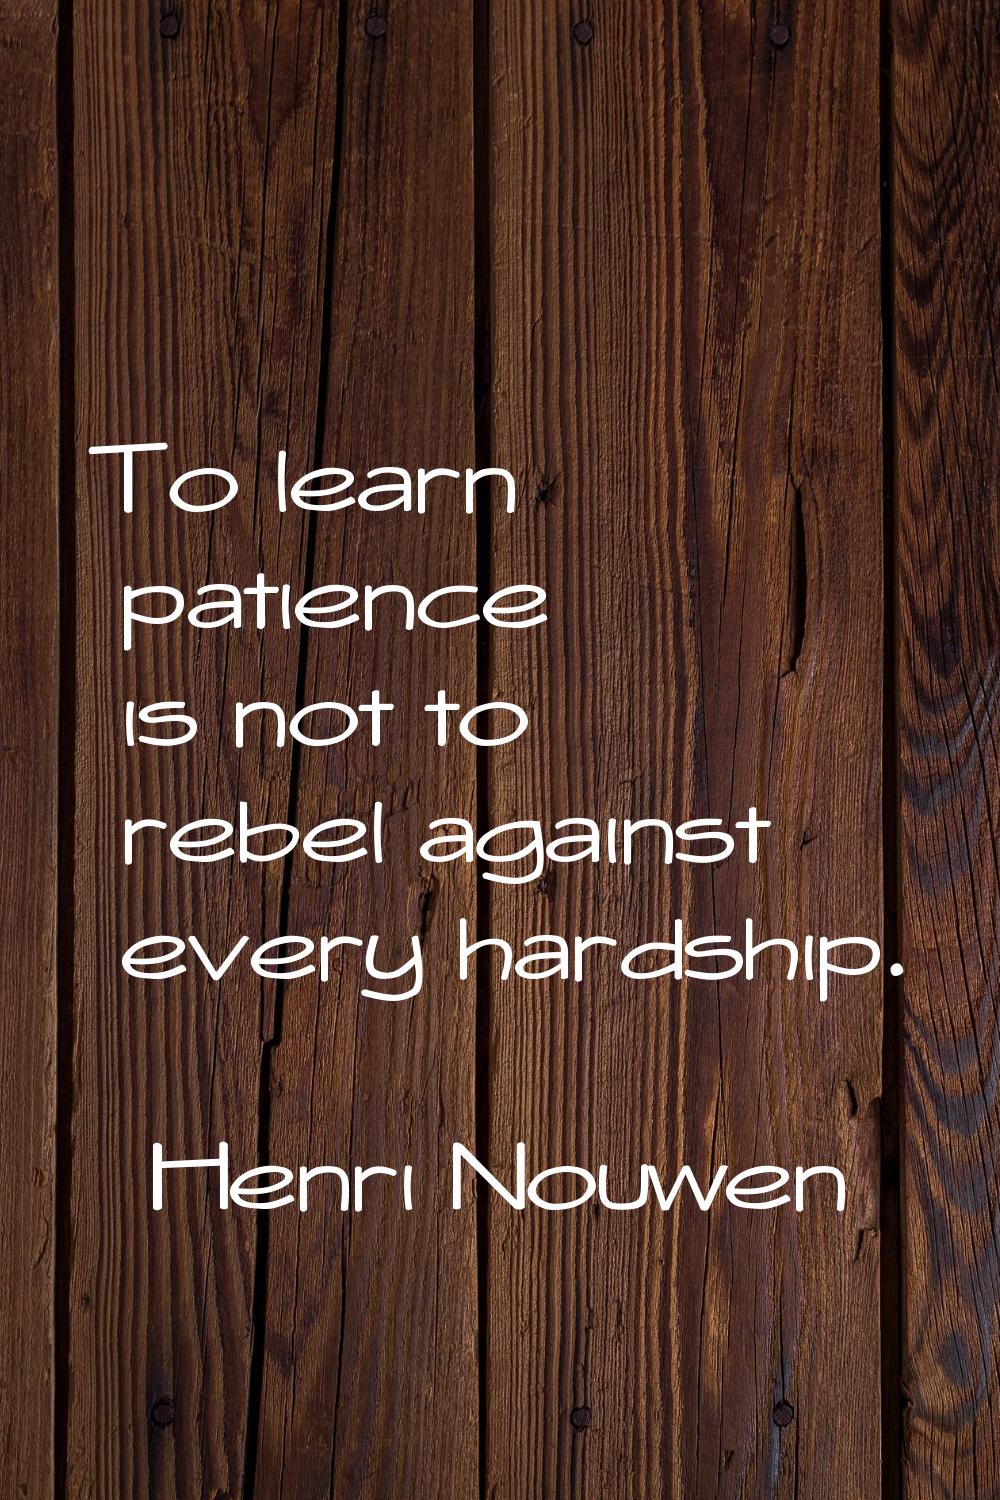 To learn patience is not to rebel against every hardship.